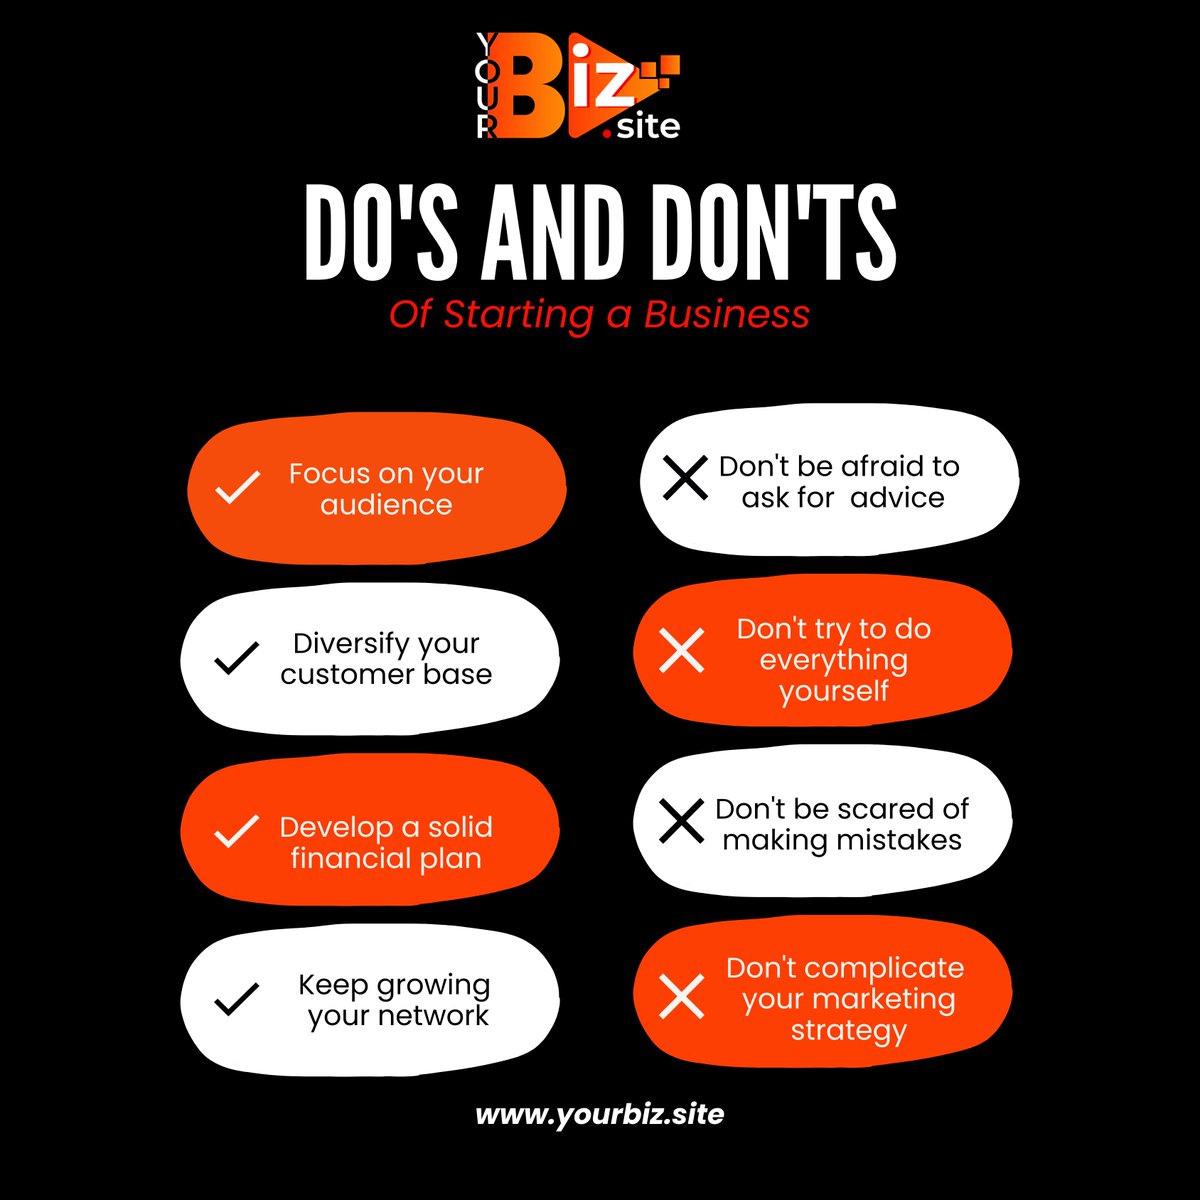 Do's and Don'ts of Starting a Business

#businessgrow #business #businessgrowthtips #growyourbusiness #businessgrowthcoach